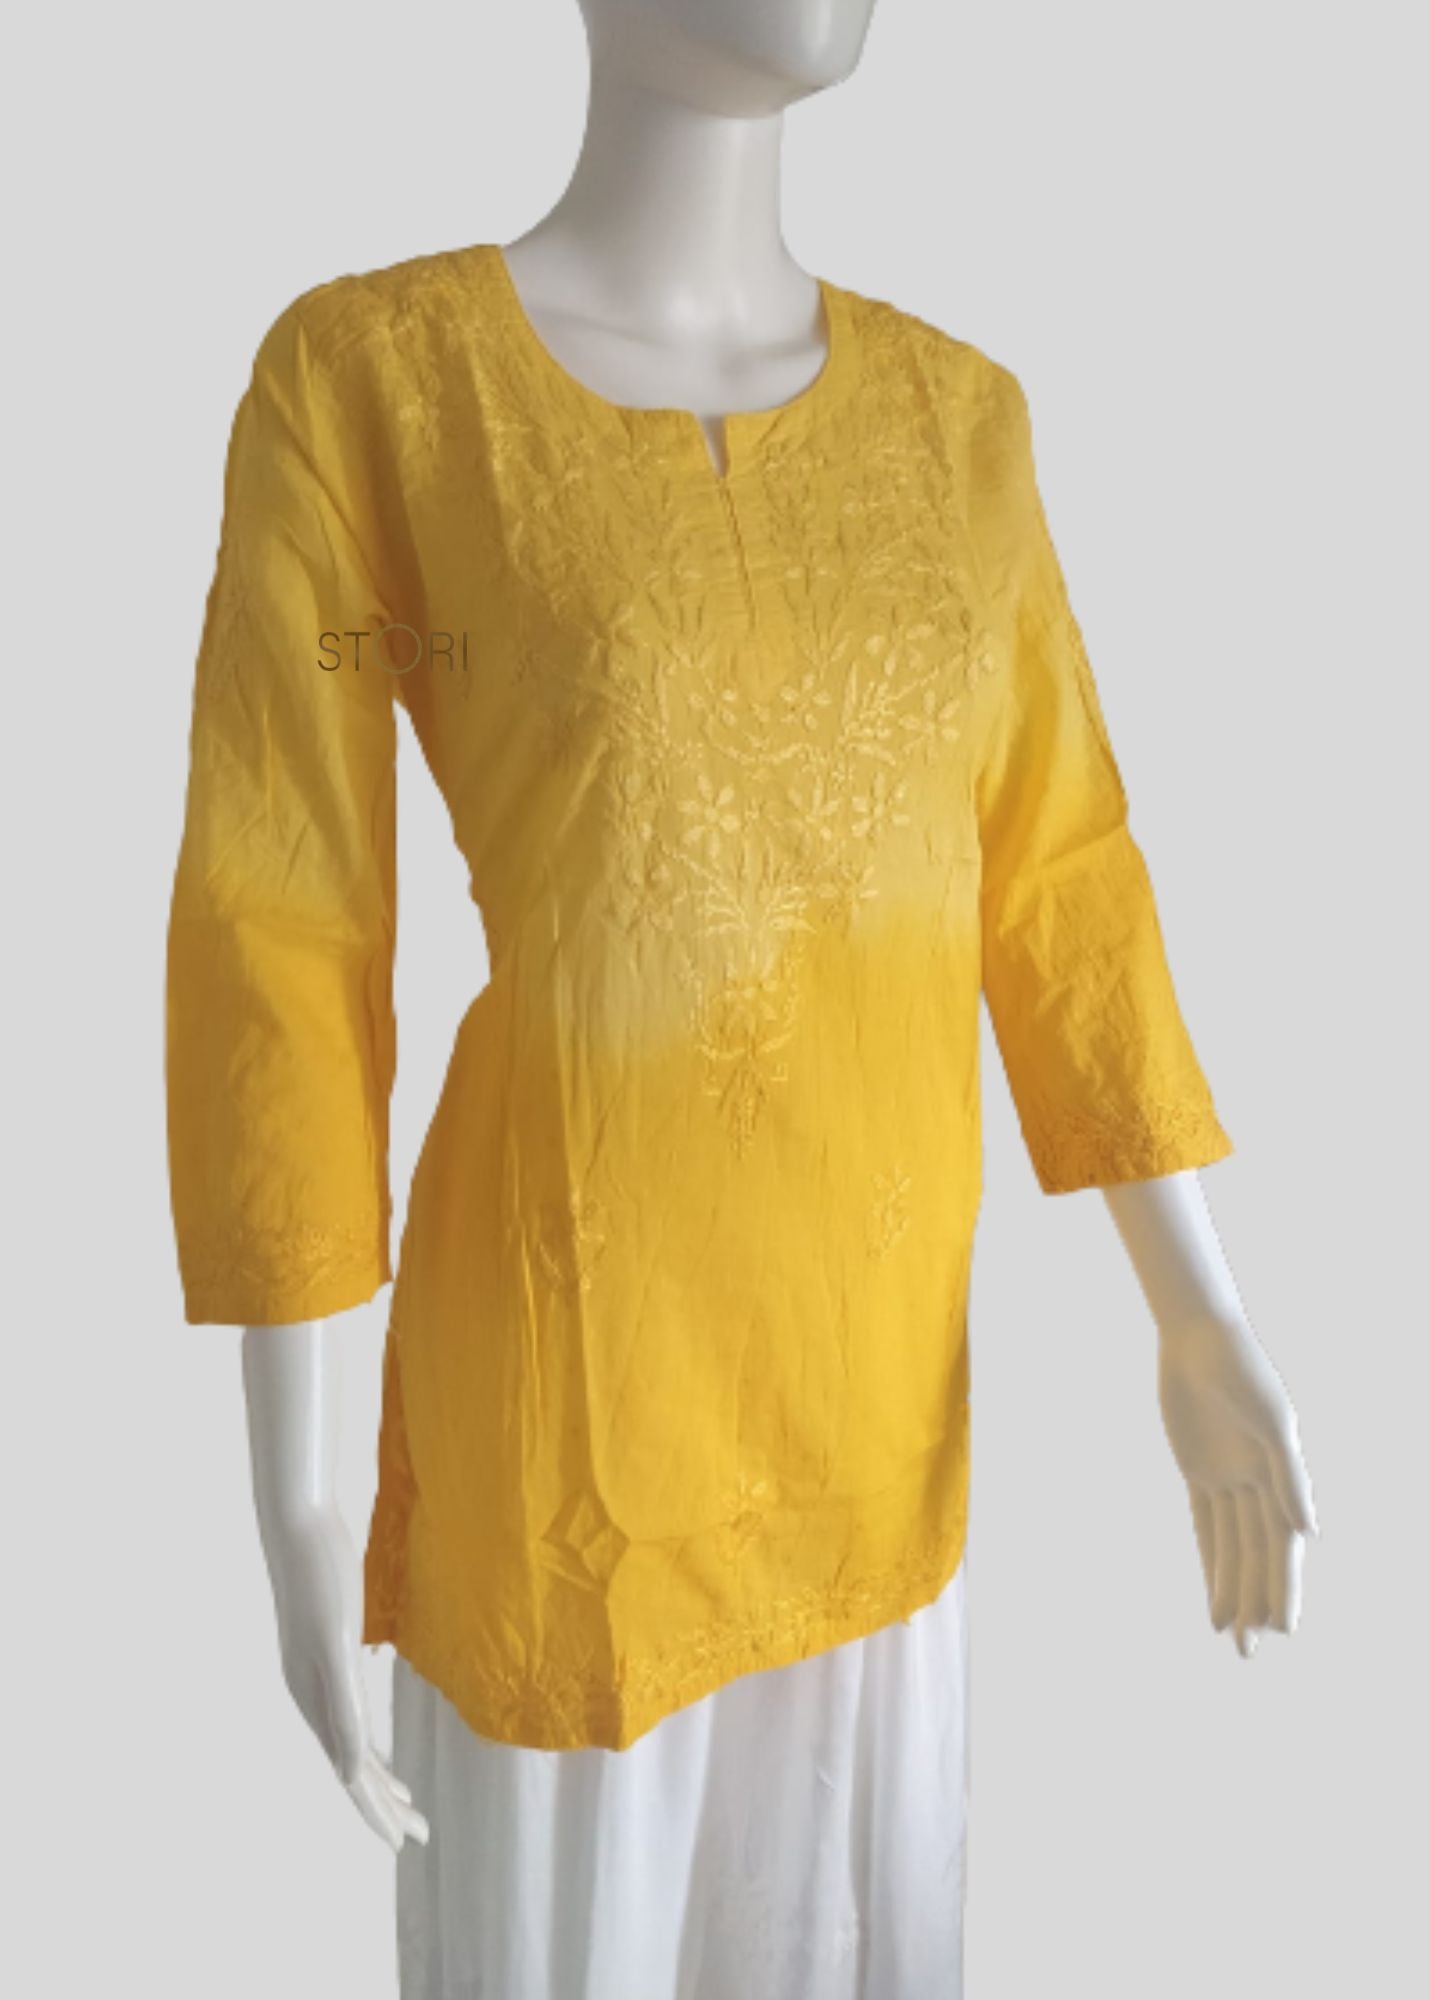 Buy Trendy Ladies Kurta Lucknowi Short Shirt White Embroidery Online in  India - Etsy | Dress clothes for women, Embroidery short dress, Casual  dresses for women